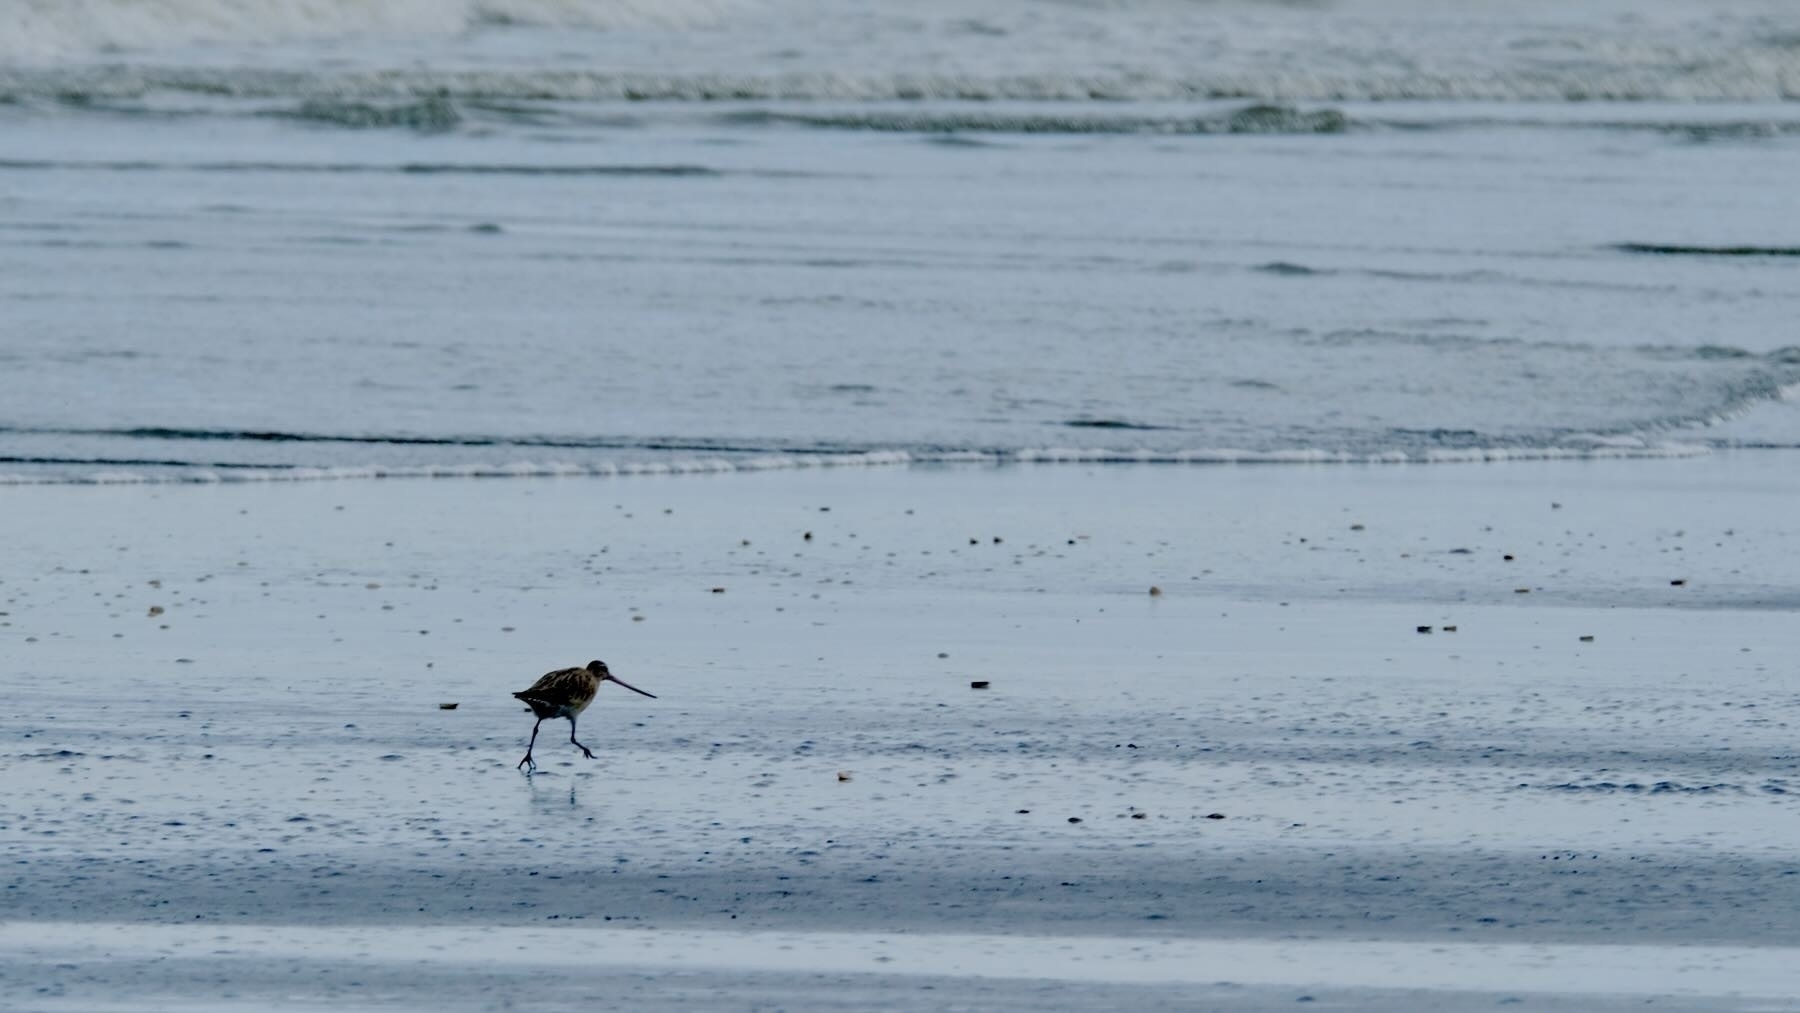 Another long-beaked wading bird in the beach shallows. 